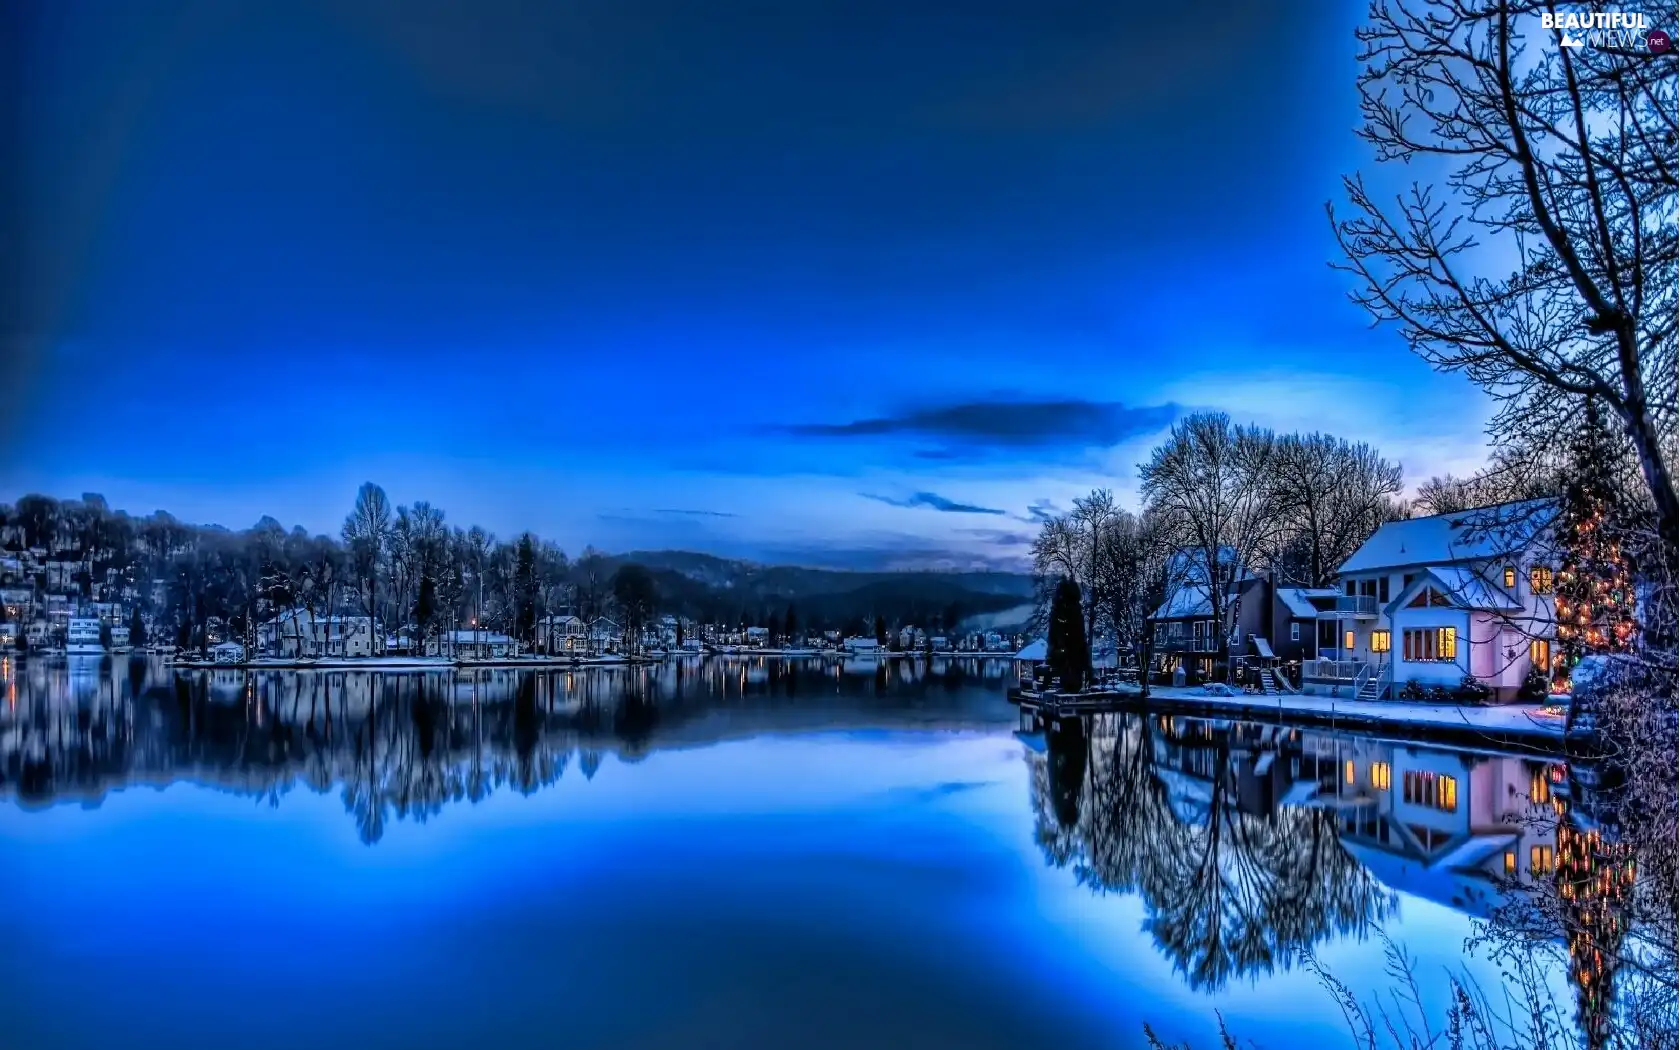 reflection, Mirror, River, Houses, winter